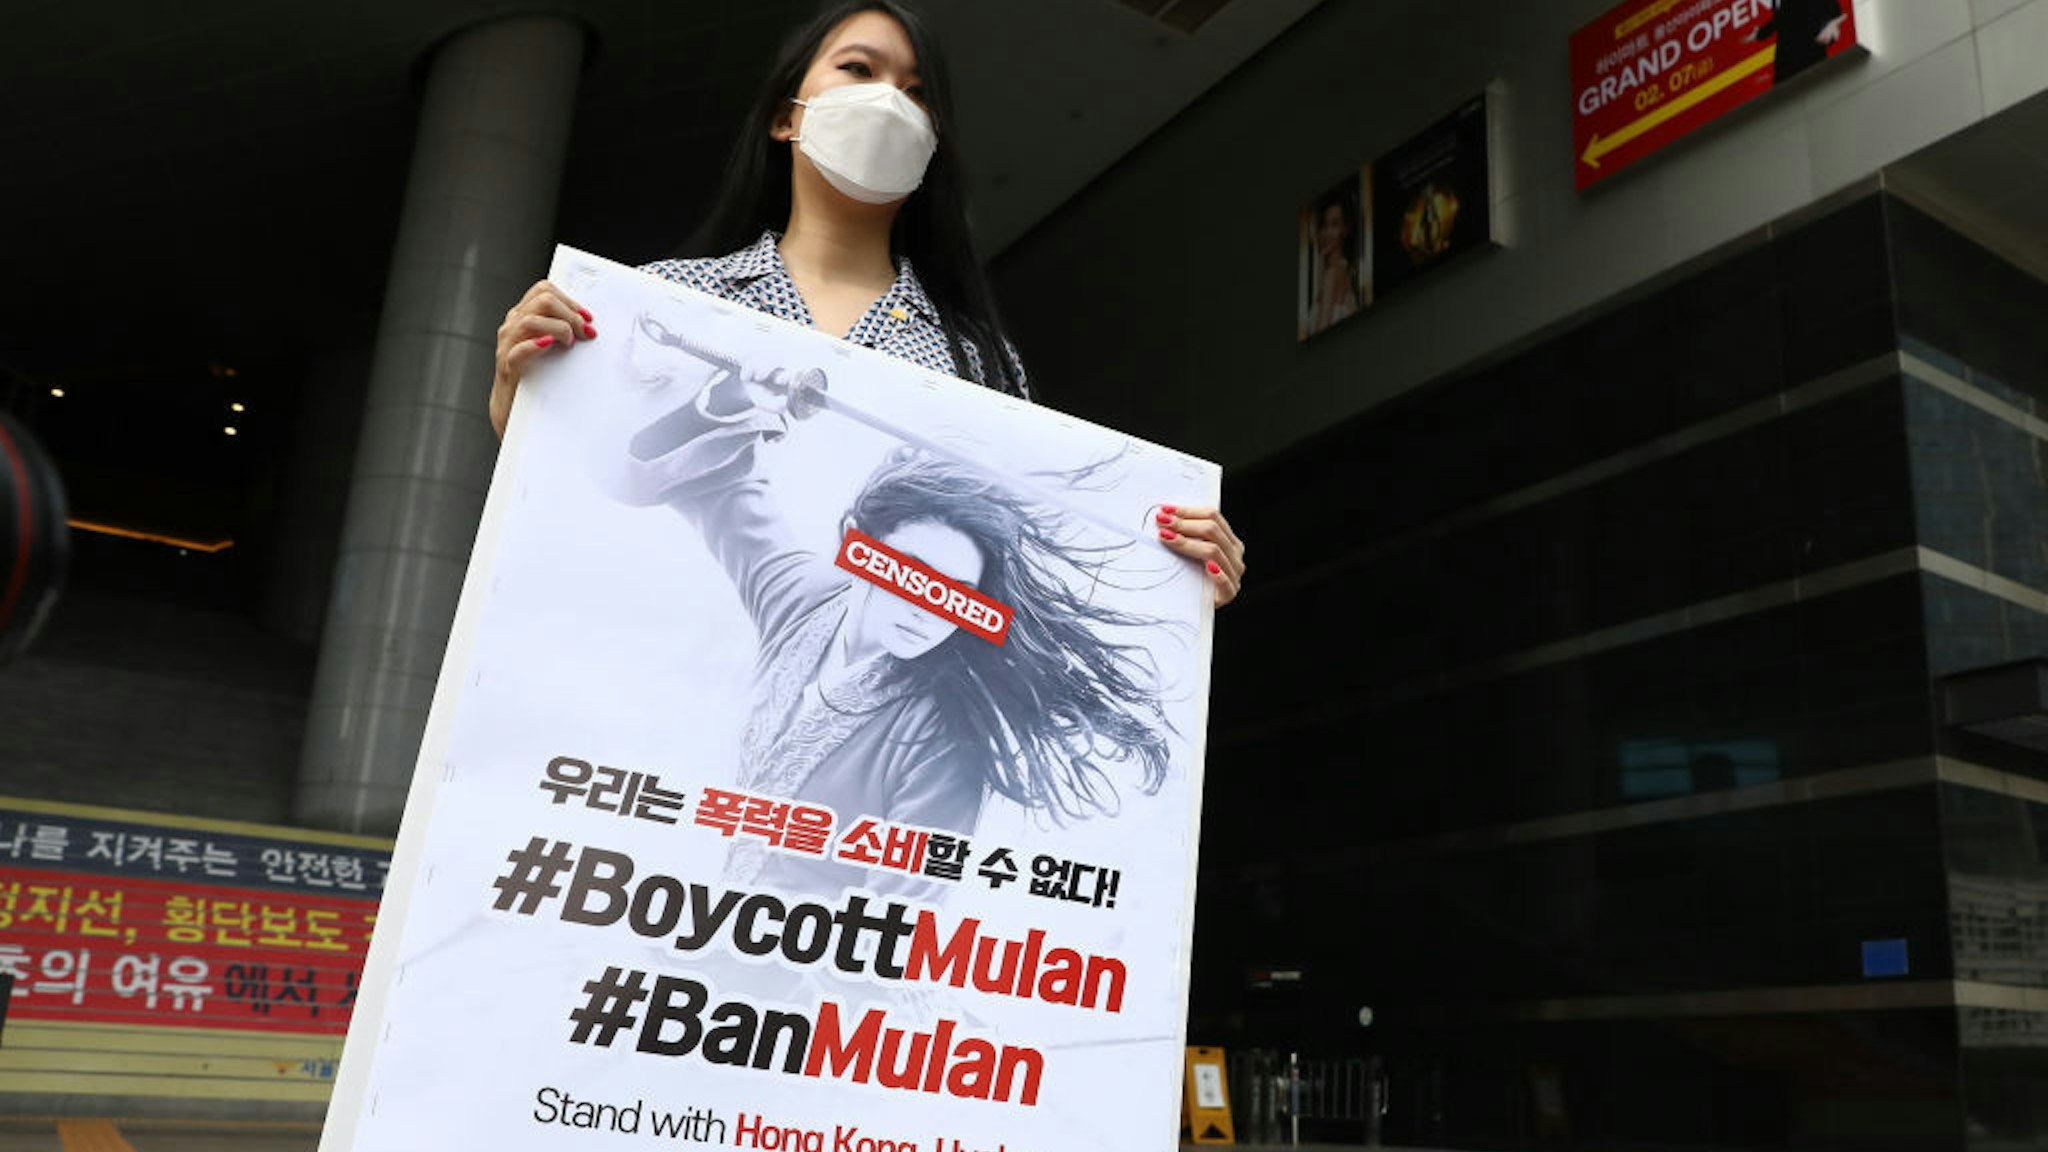 A South Korean supporter of Hong Kong protesters holds a placard in a lone rally calling for a boycott of the Disney's live-action remake of "Mulan" ourside a theatre on September 17, 2020 in Seoul, South Korea. With the South Korean released of "Mulan" just a day away, refreshed calls to boycott the film have been growing here on social media due to a few controversies. The film has been under fire since its lead actress Liu Yifei posted comments supporting Hong Kong's police in their crackdown on pro-democracy demonstrations last year. The movie was released in South Korea on September 17. (Photo by Chung Sung-Jun/Getty Images)